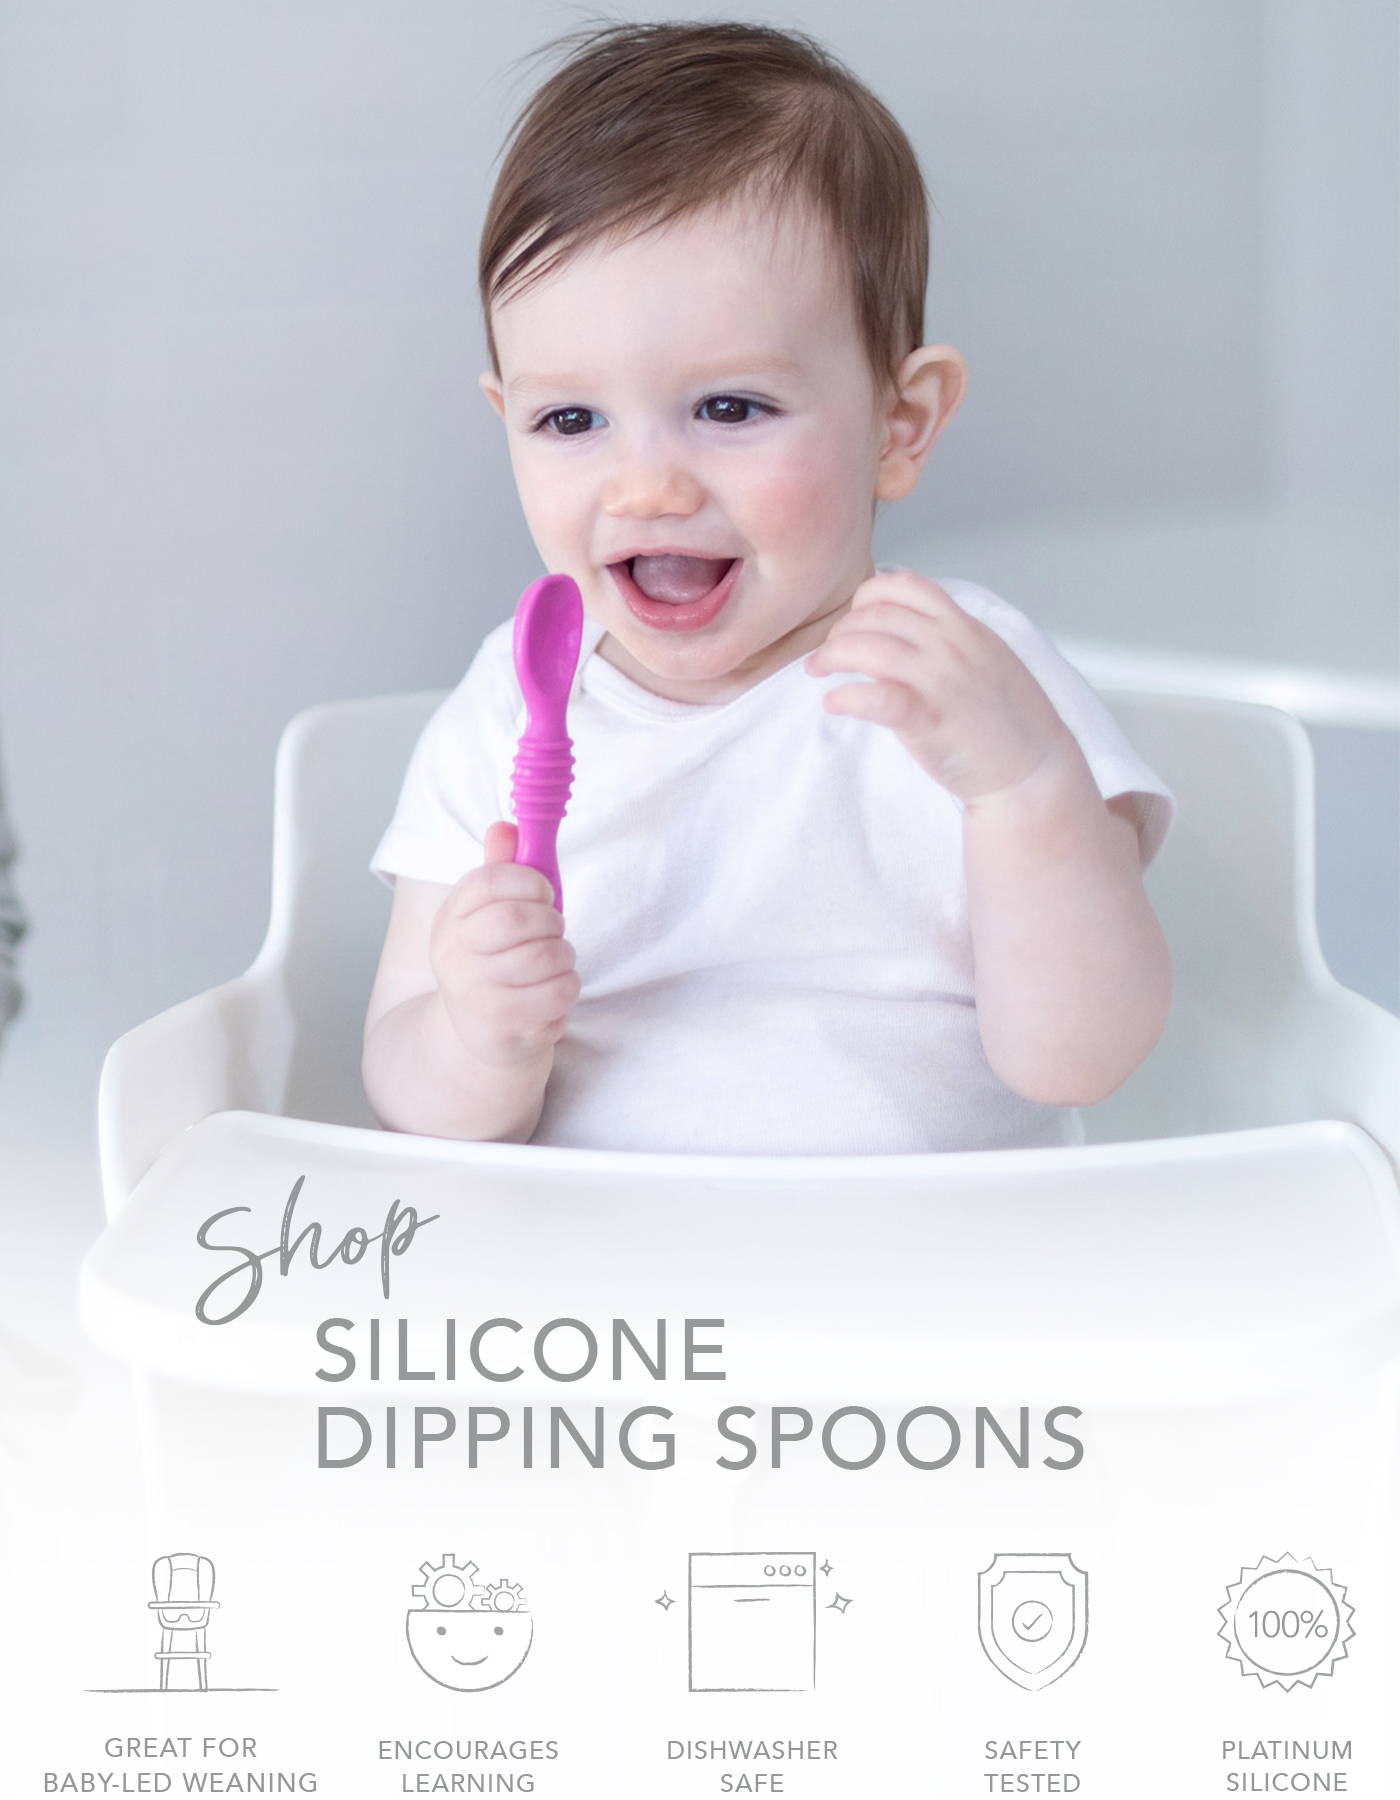 shop silicone dipping spoons, great for baby-led weaning, encourages learning, dishwasher safe, safety tested, platinum silicone